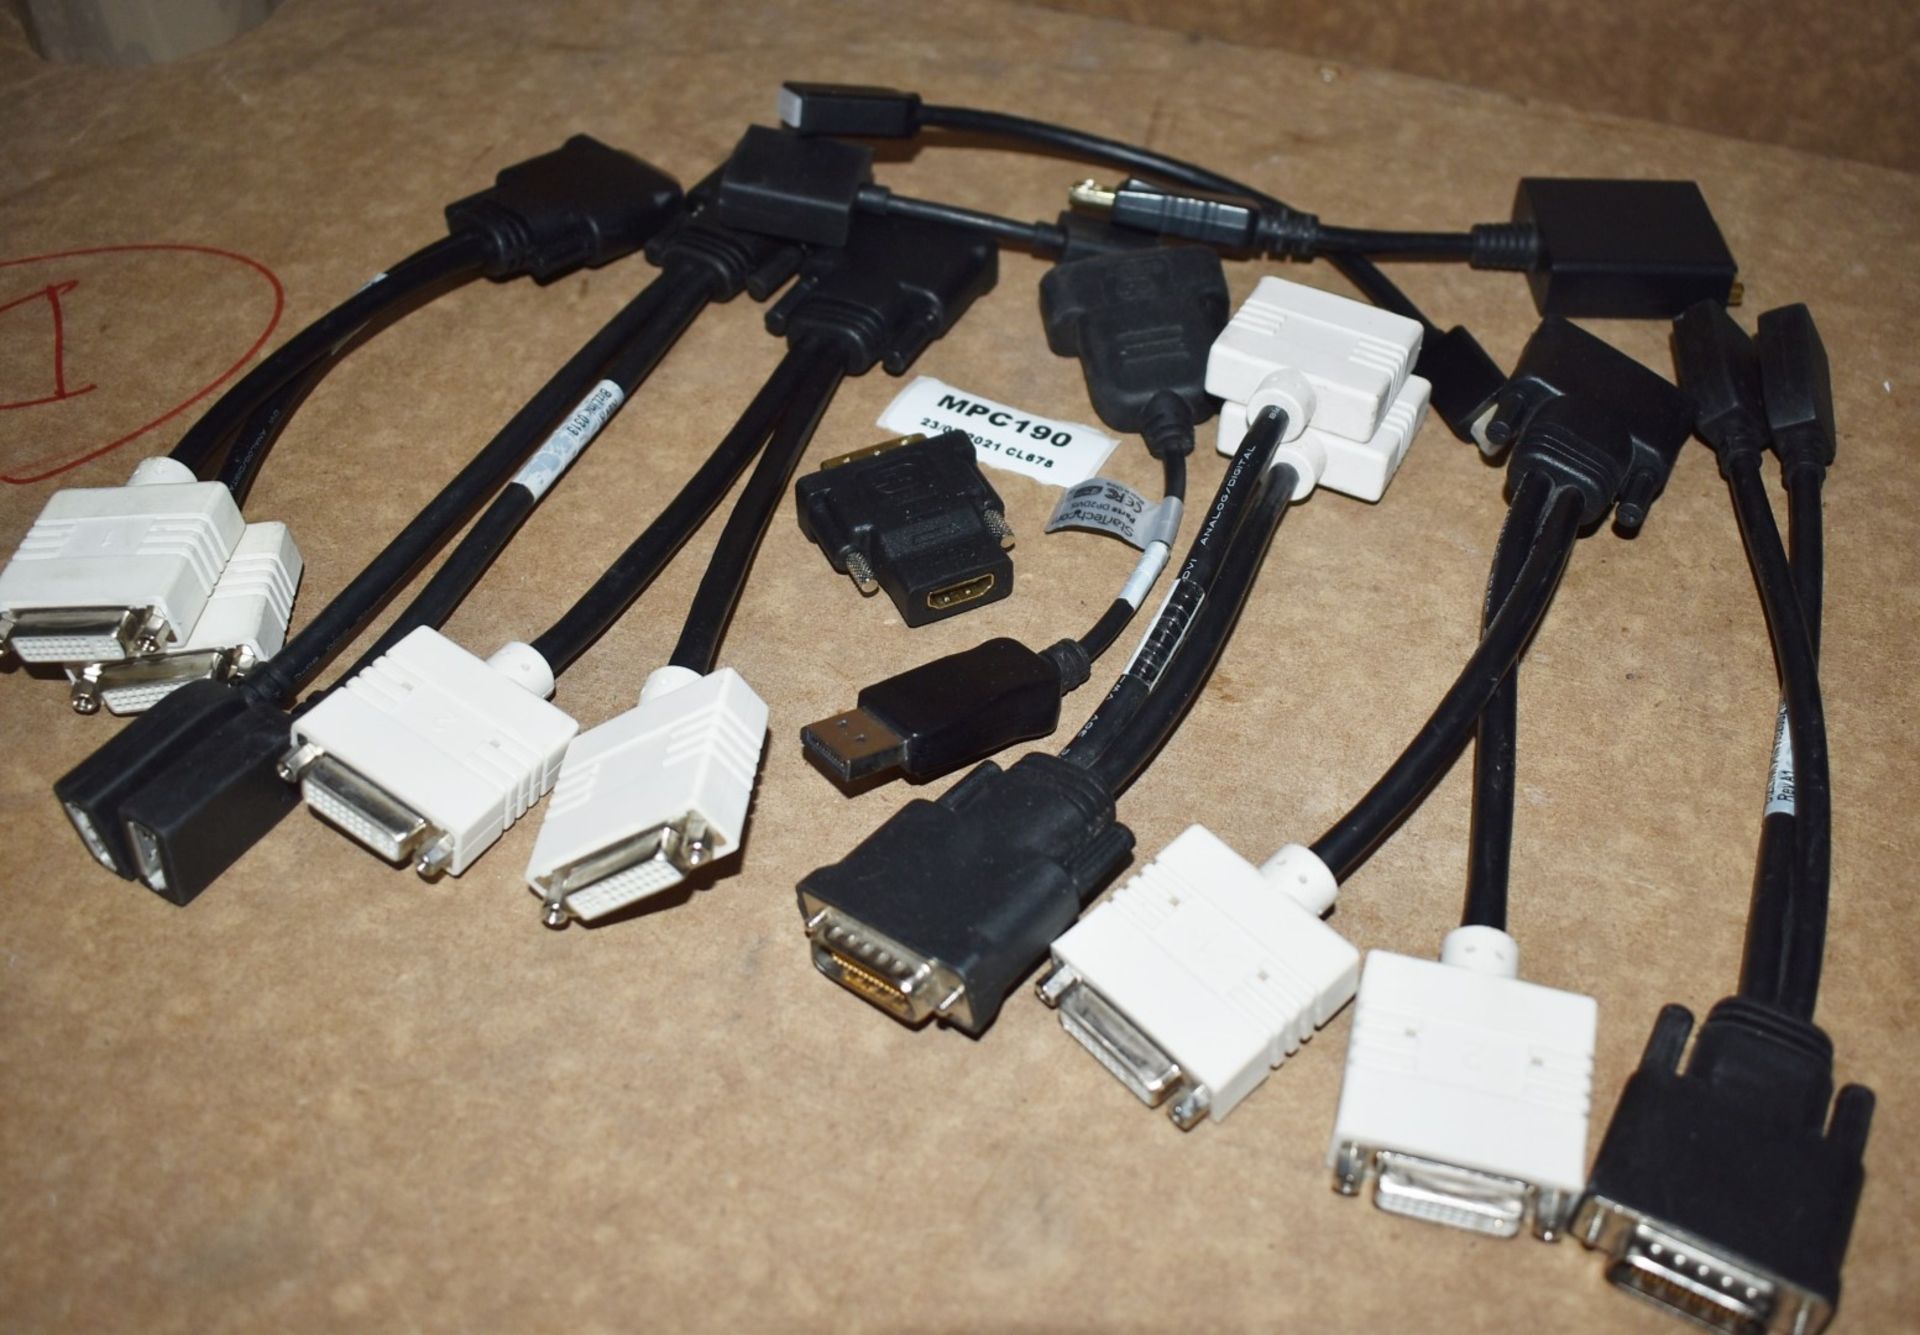 17 x Assorted Monitor Connector Cables - Ref: MPC190 P1 - CL678 - Location: Altrincham WA14This - Image 6 of 11